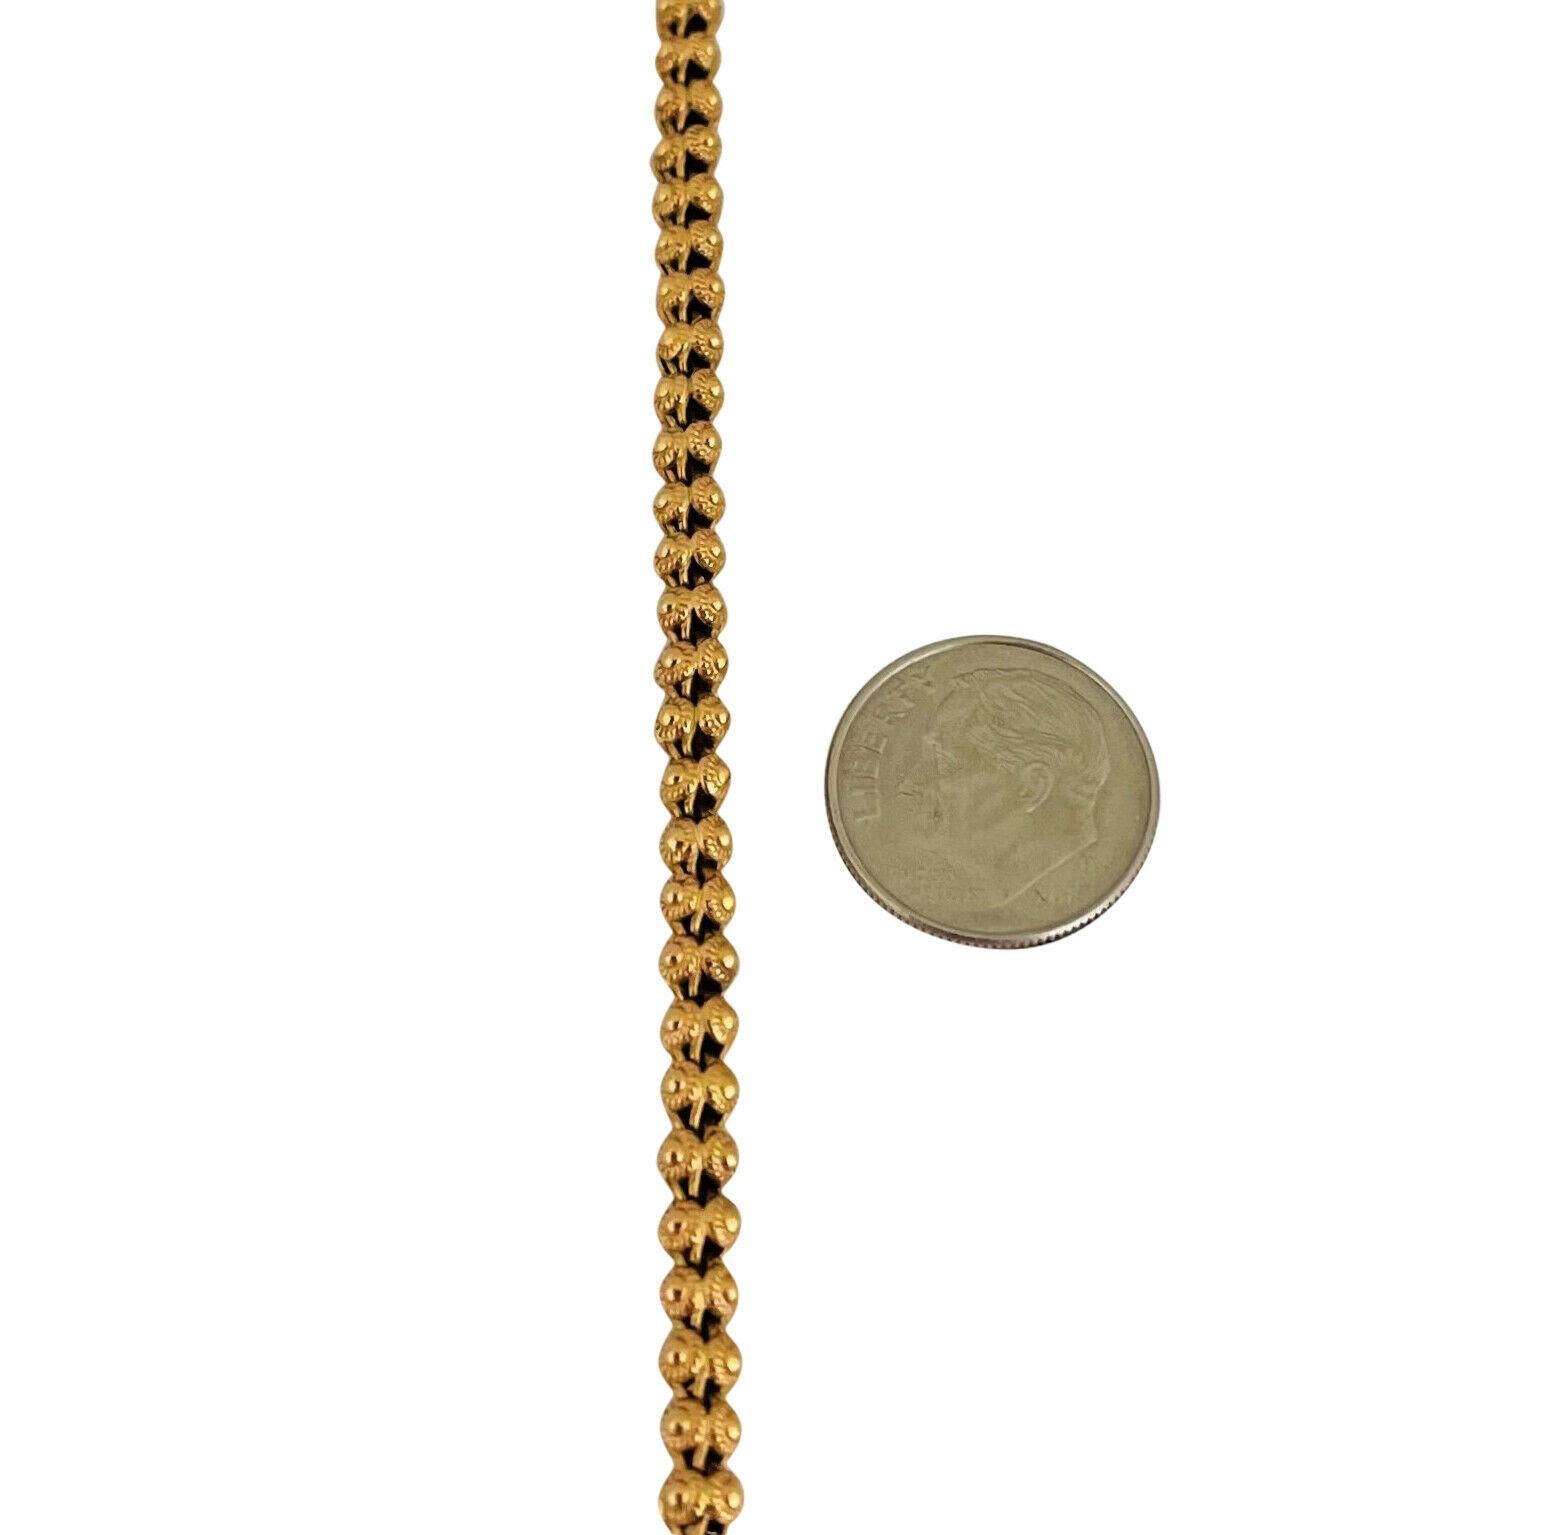 Women's or Men's 19 Karat Portuguese Yellow Gold Squared Fancy Beaded Link Necklace